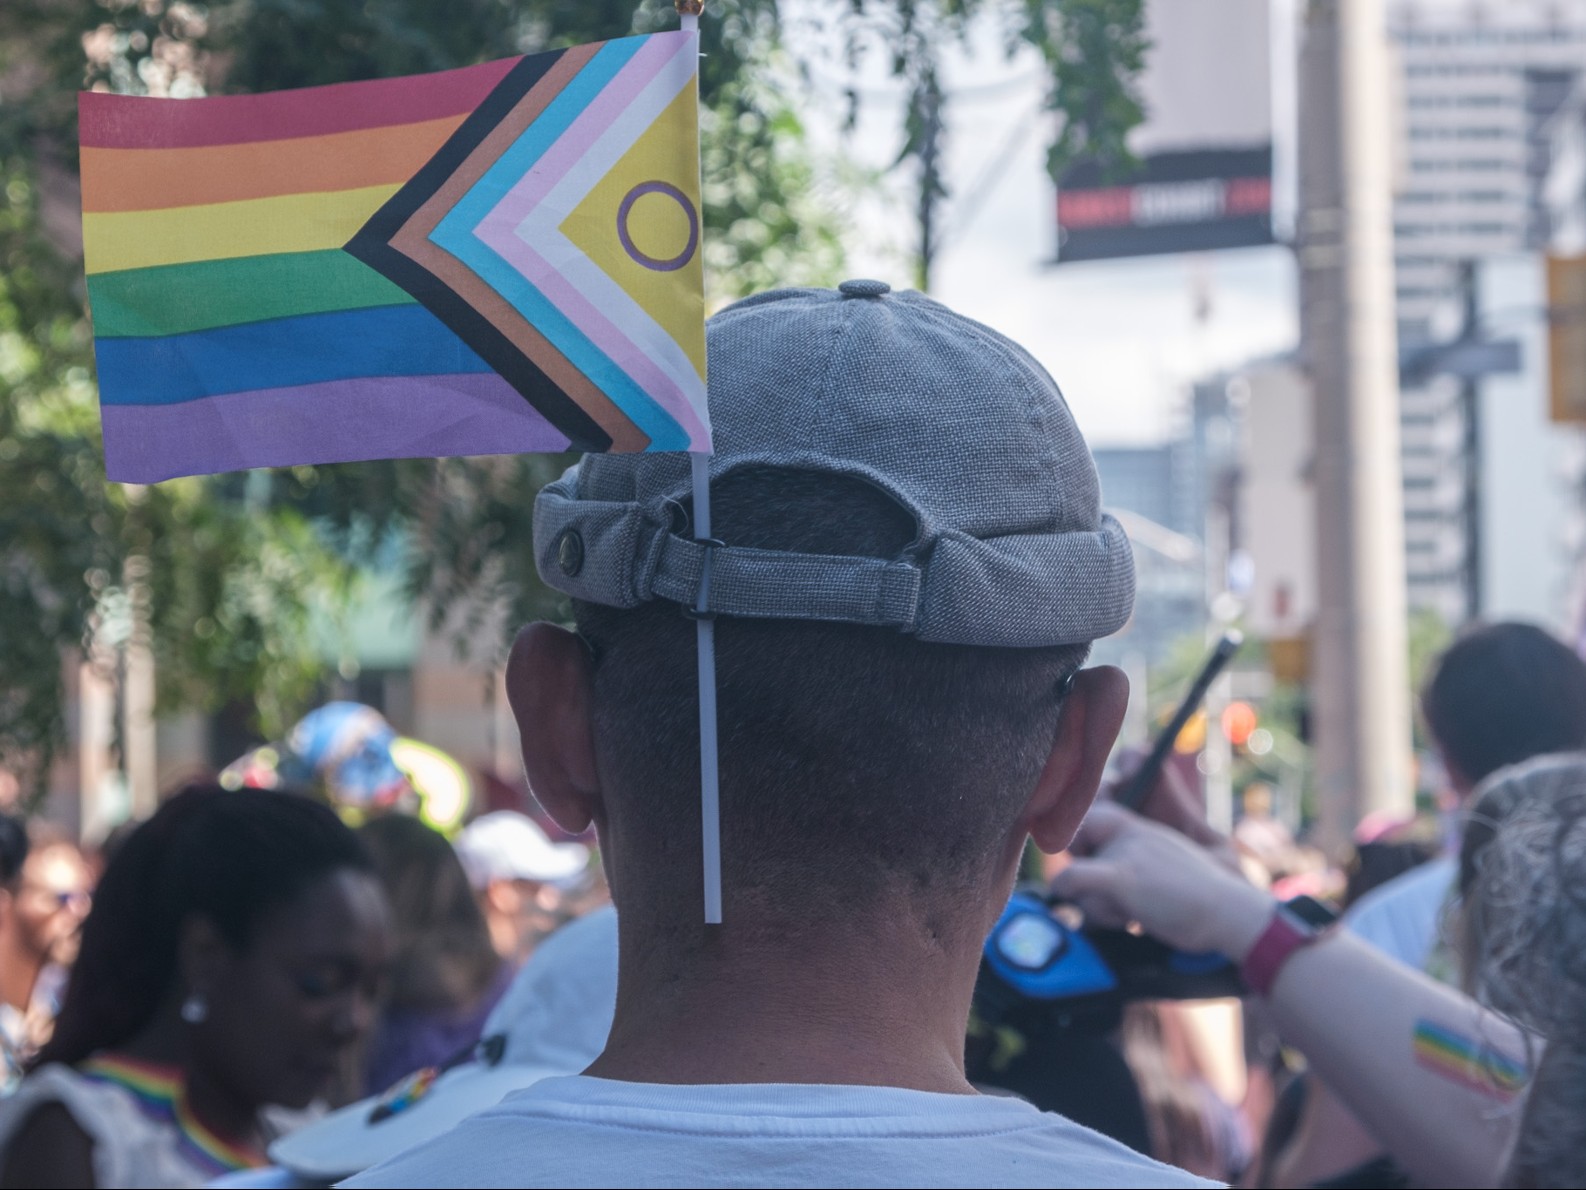 A picture of the back of the head of a man wearing a grey hat with a Pride flag stuck down the back.